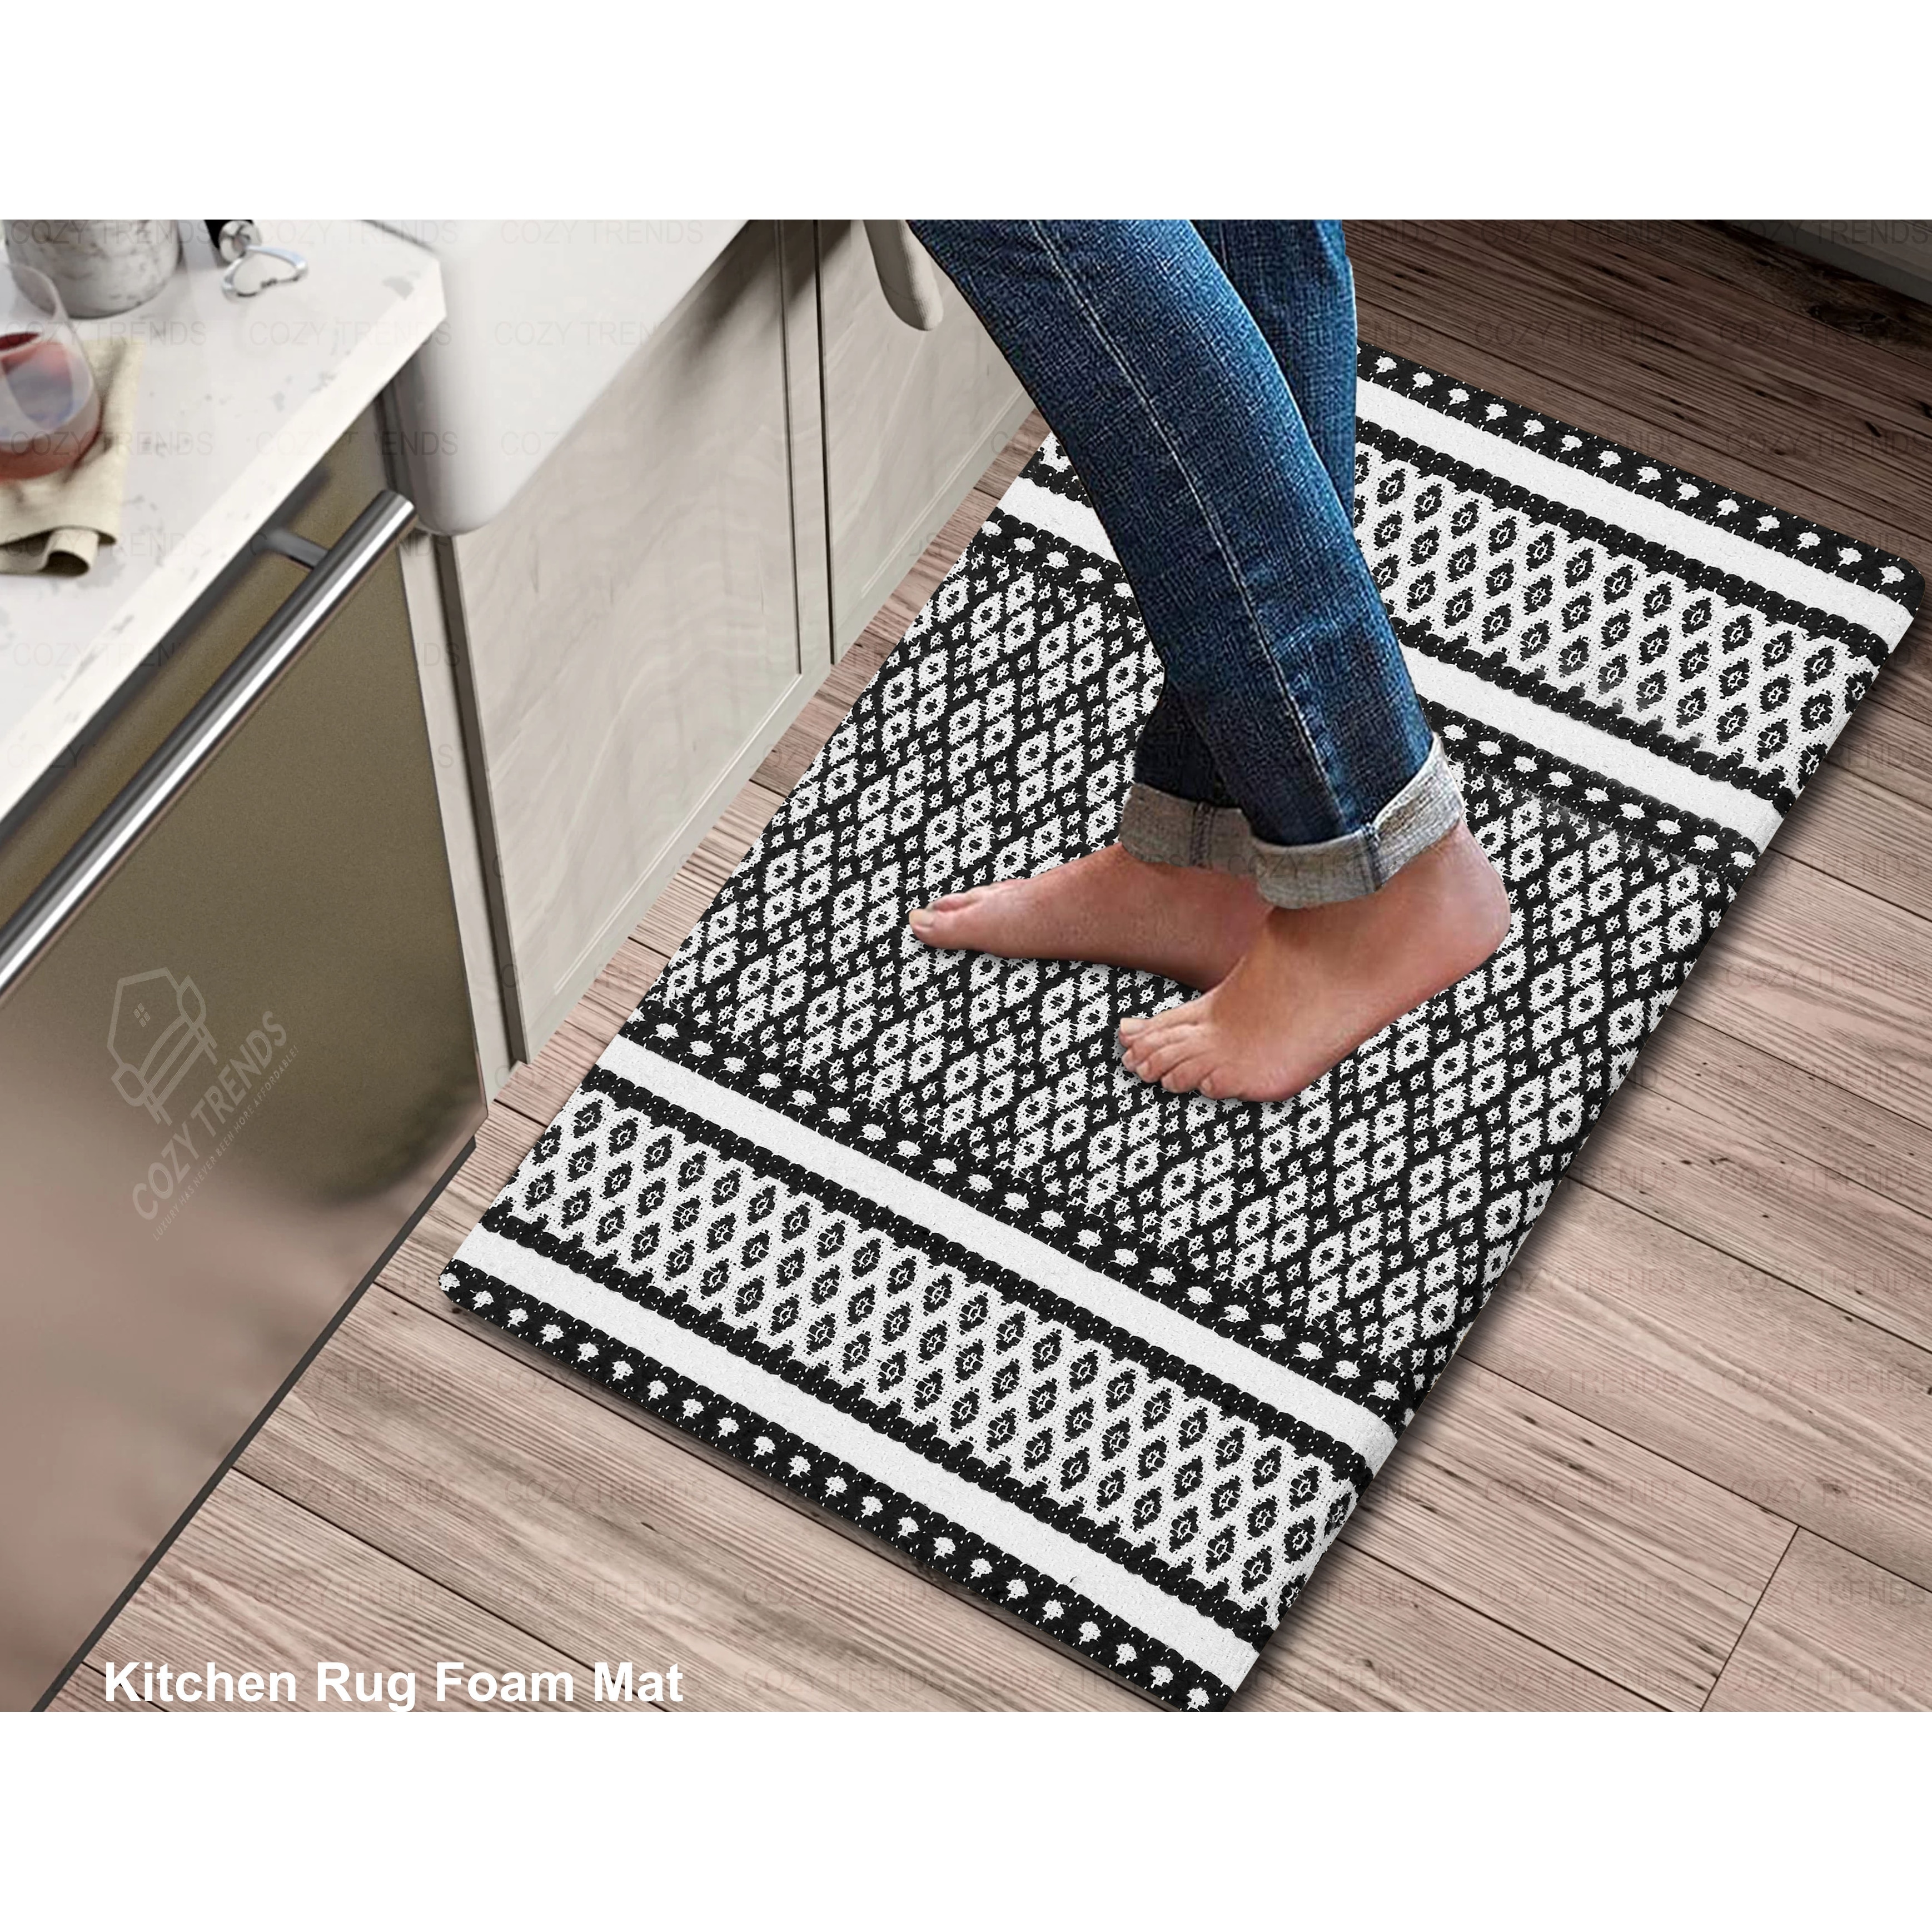 https://ak1.ostkcdn.com/images/products/is/images/direct/861773c9322ade6569d69cc9e31e3a971ea4050c/Cotton-Kitchen-Mat-Cushioned-Anti-Fatigue-Rug%2C-Non-Slip-Mats-Comfort-Foam-Rug-for-Kitchen%2C-Office%2C-Sink%2C-Laundry---18%27%27x30%27%27.jpg